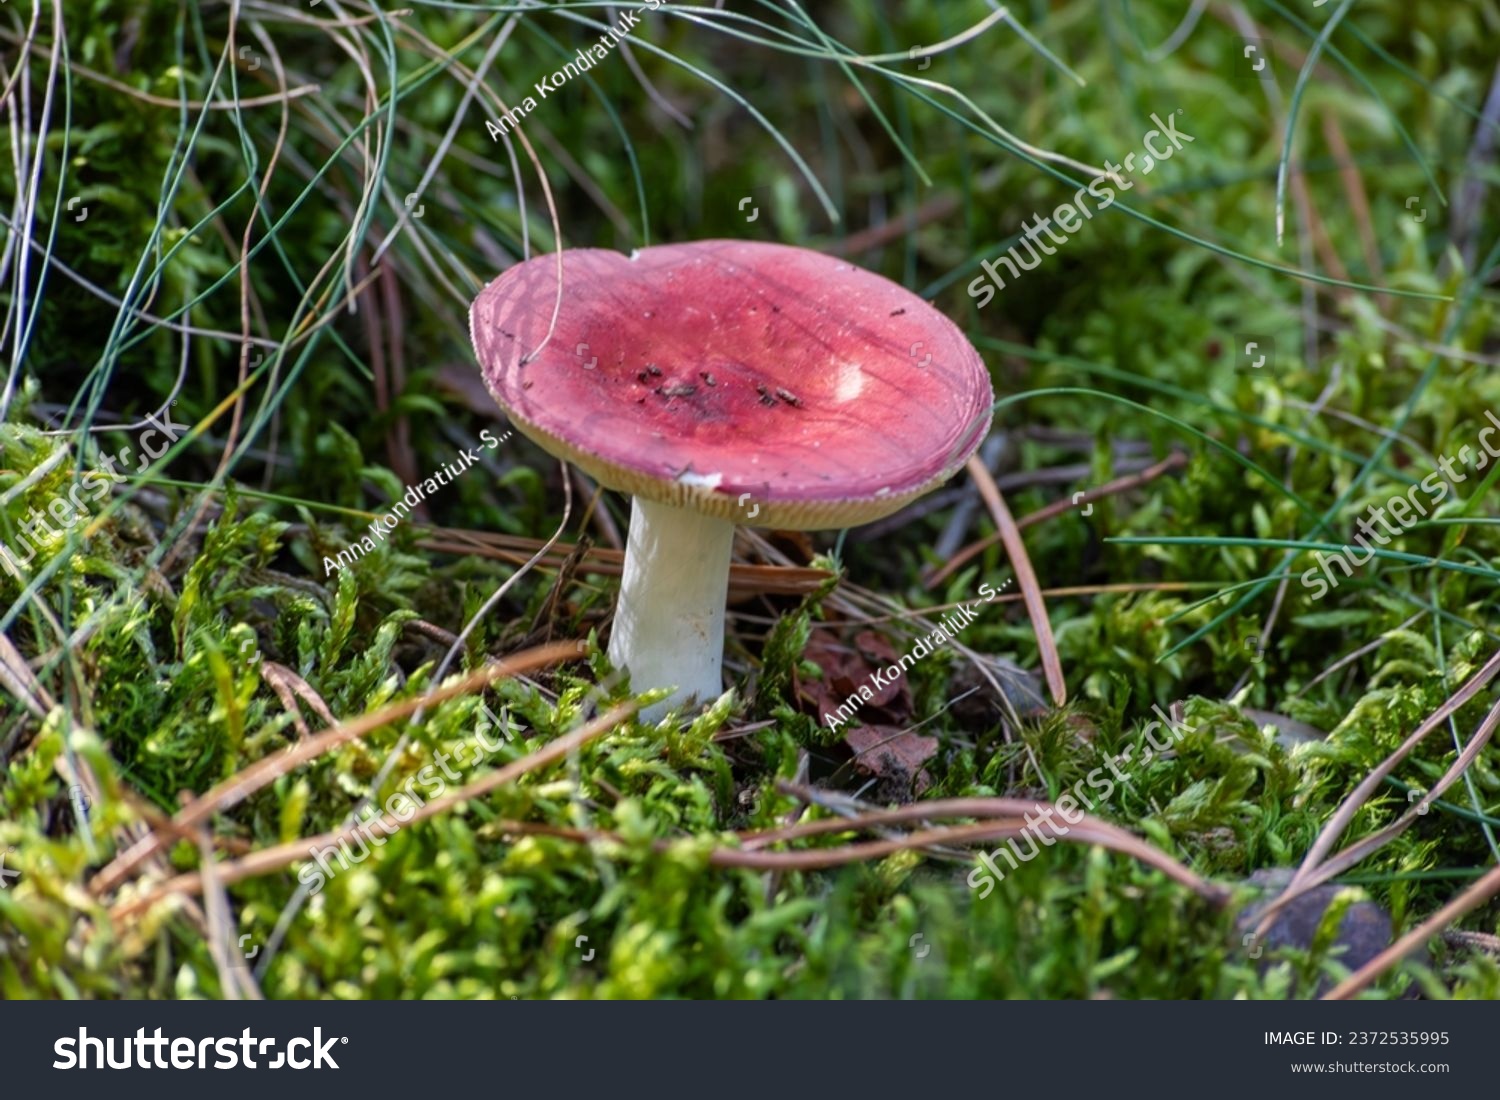 russula sanguinaria mushroom,red russula in the autumn forest.mushroom not edible #2372535995